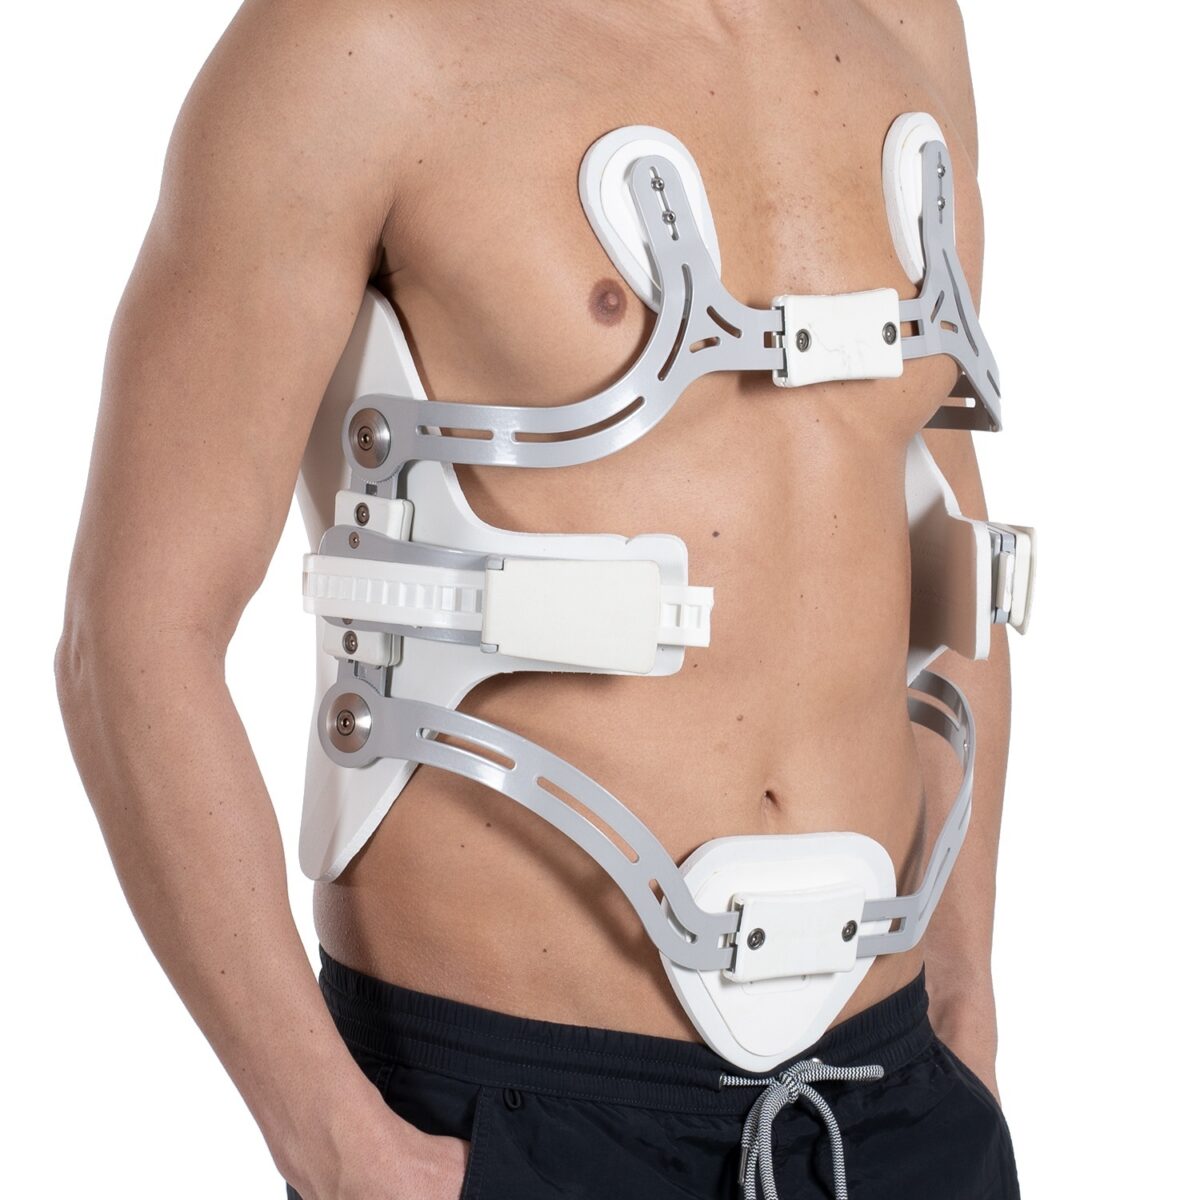 wingmed orthopedic equipments W450 hyperextension corset 4 points 15